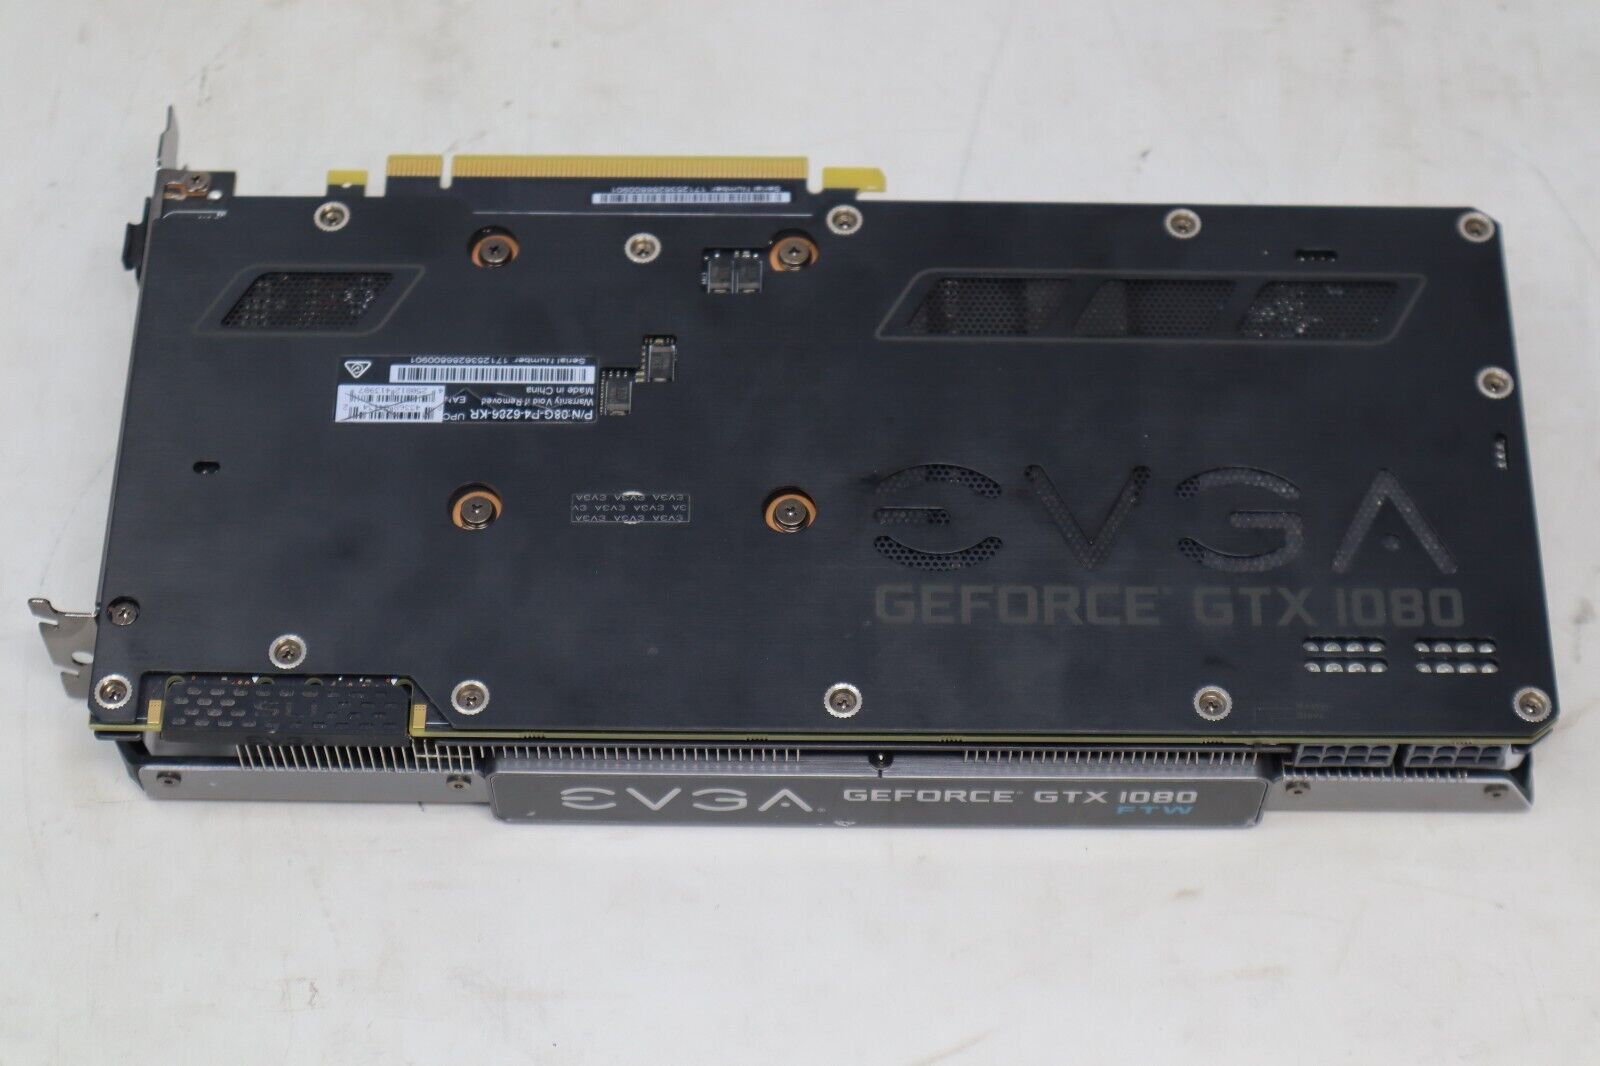 EVGA | GeForce GTX 1080 FTW | Gaming Graphics Card | PCIe Gold Connector